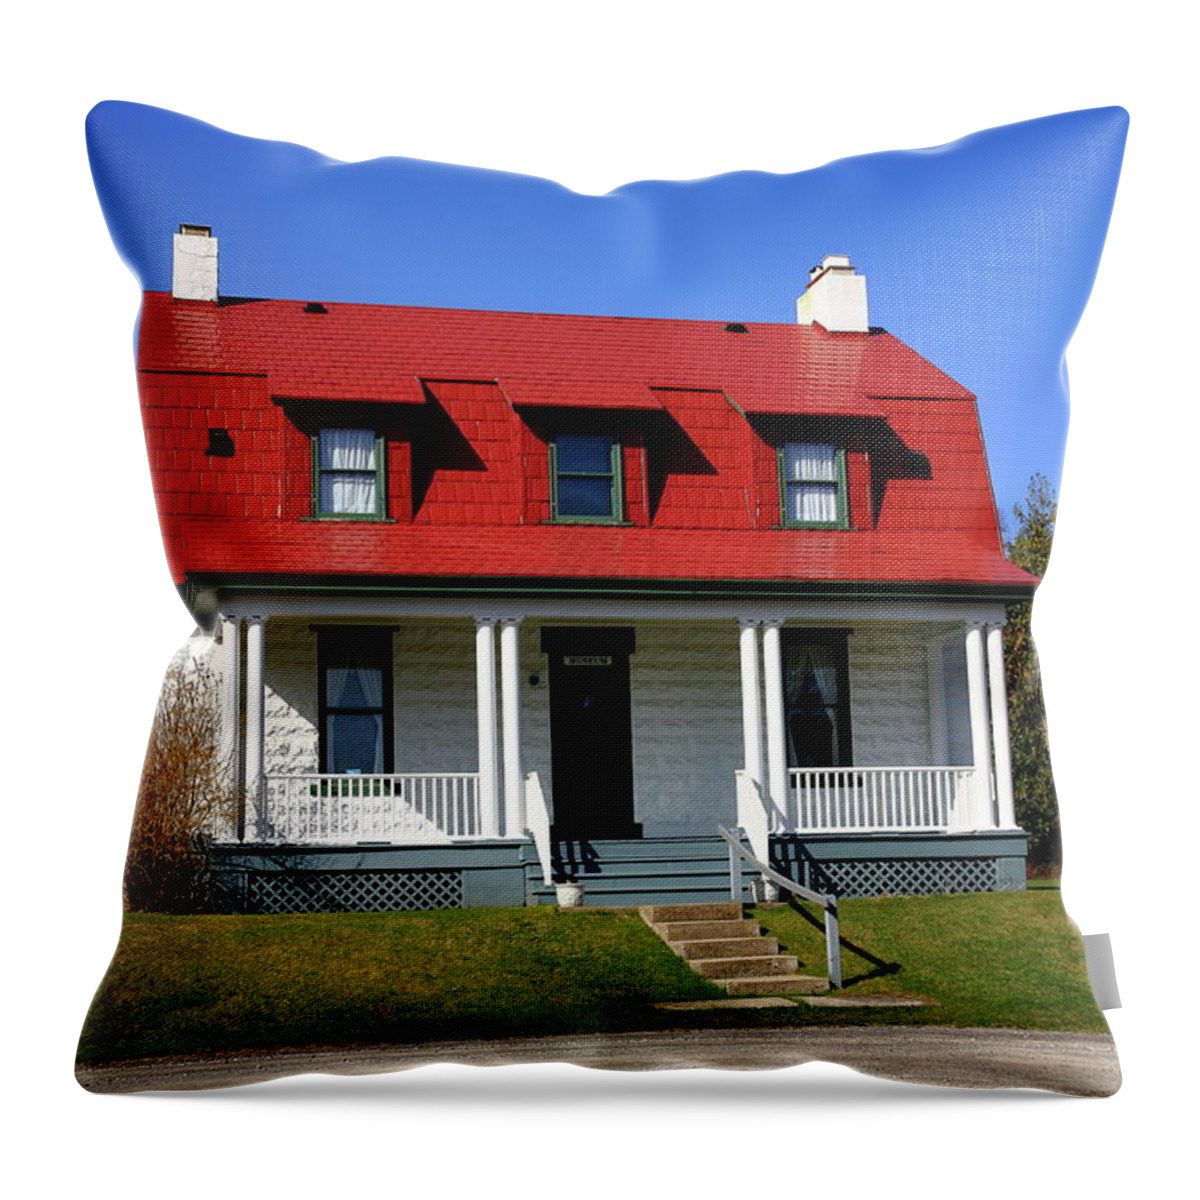 America Throw Pillow featuring the photograph Keeper's House - Presque Isle Light Michigan by Frank Romeo